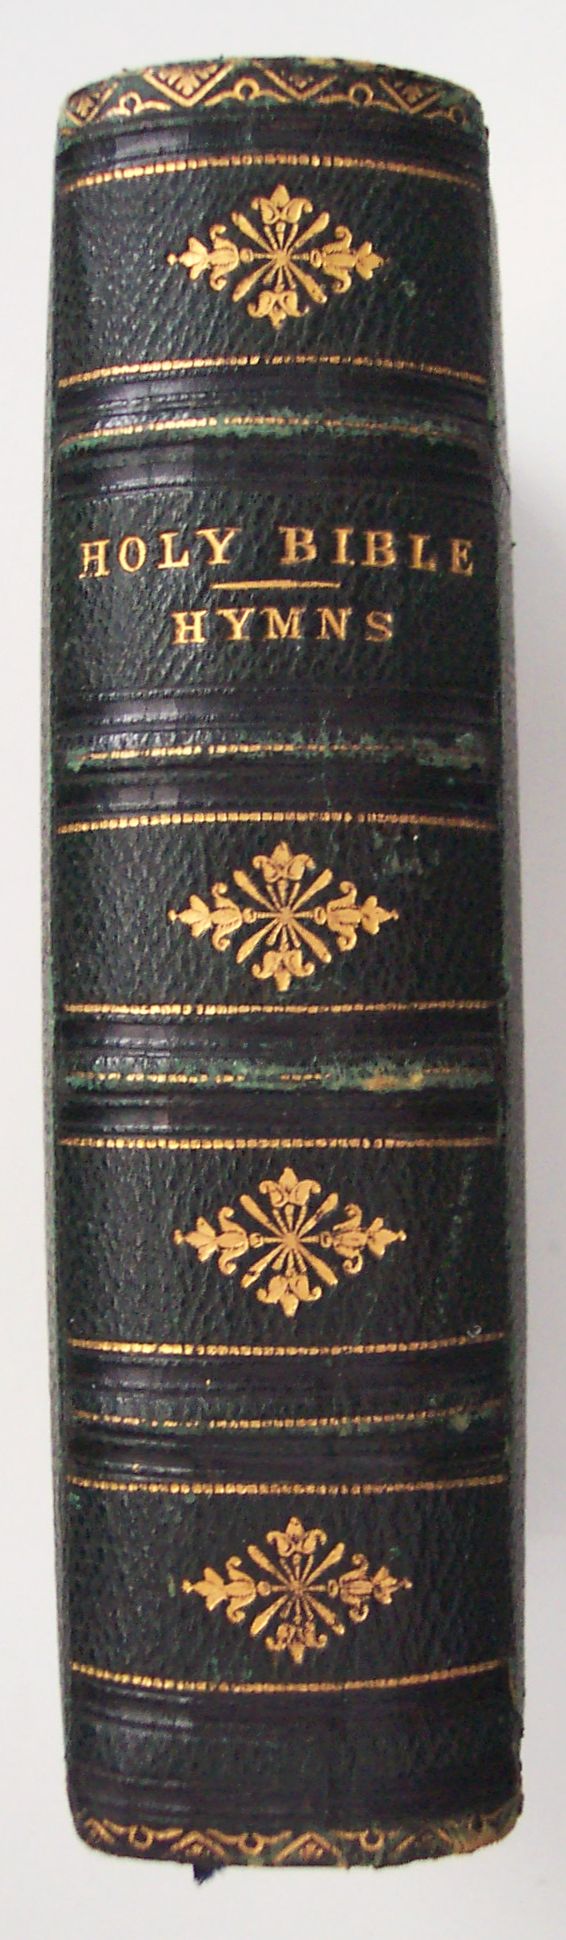 Bible Spine